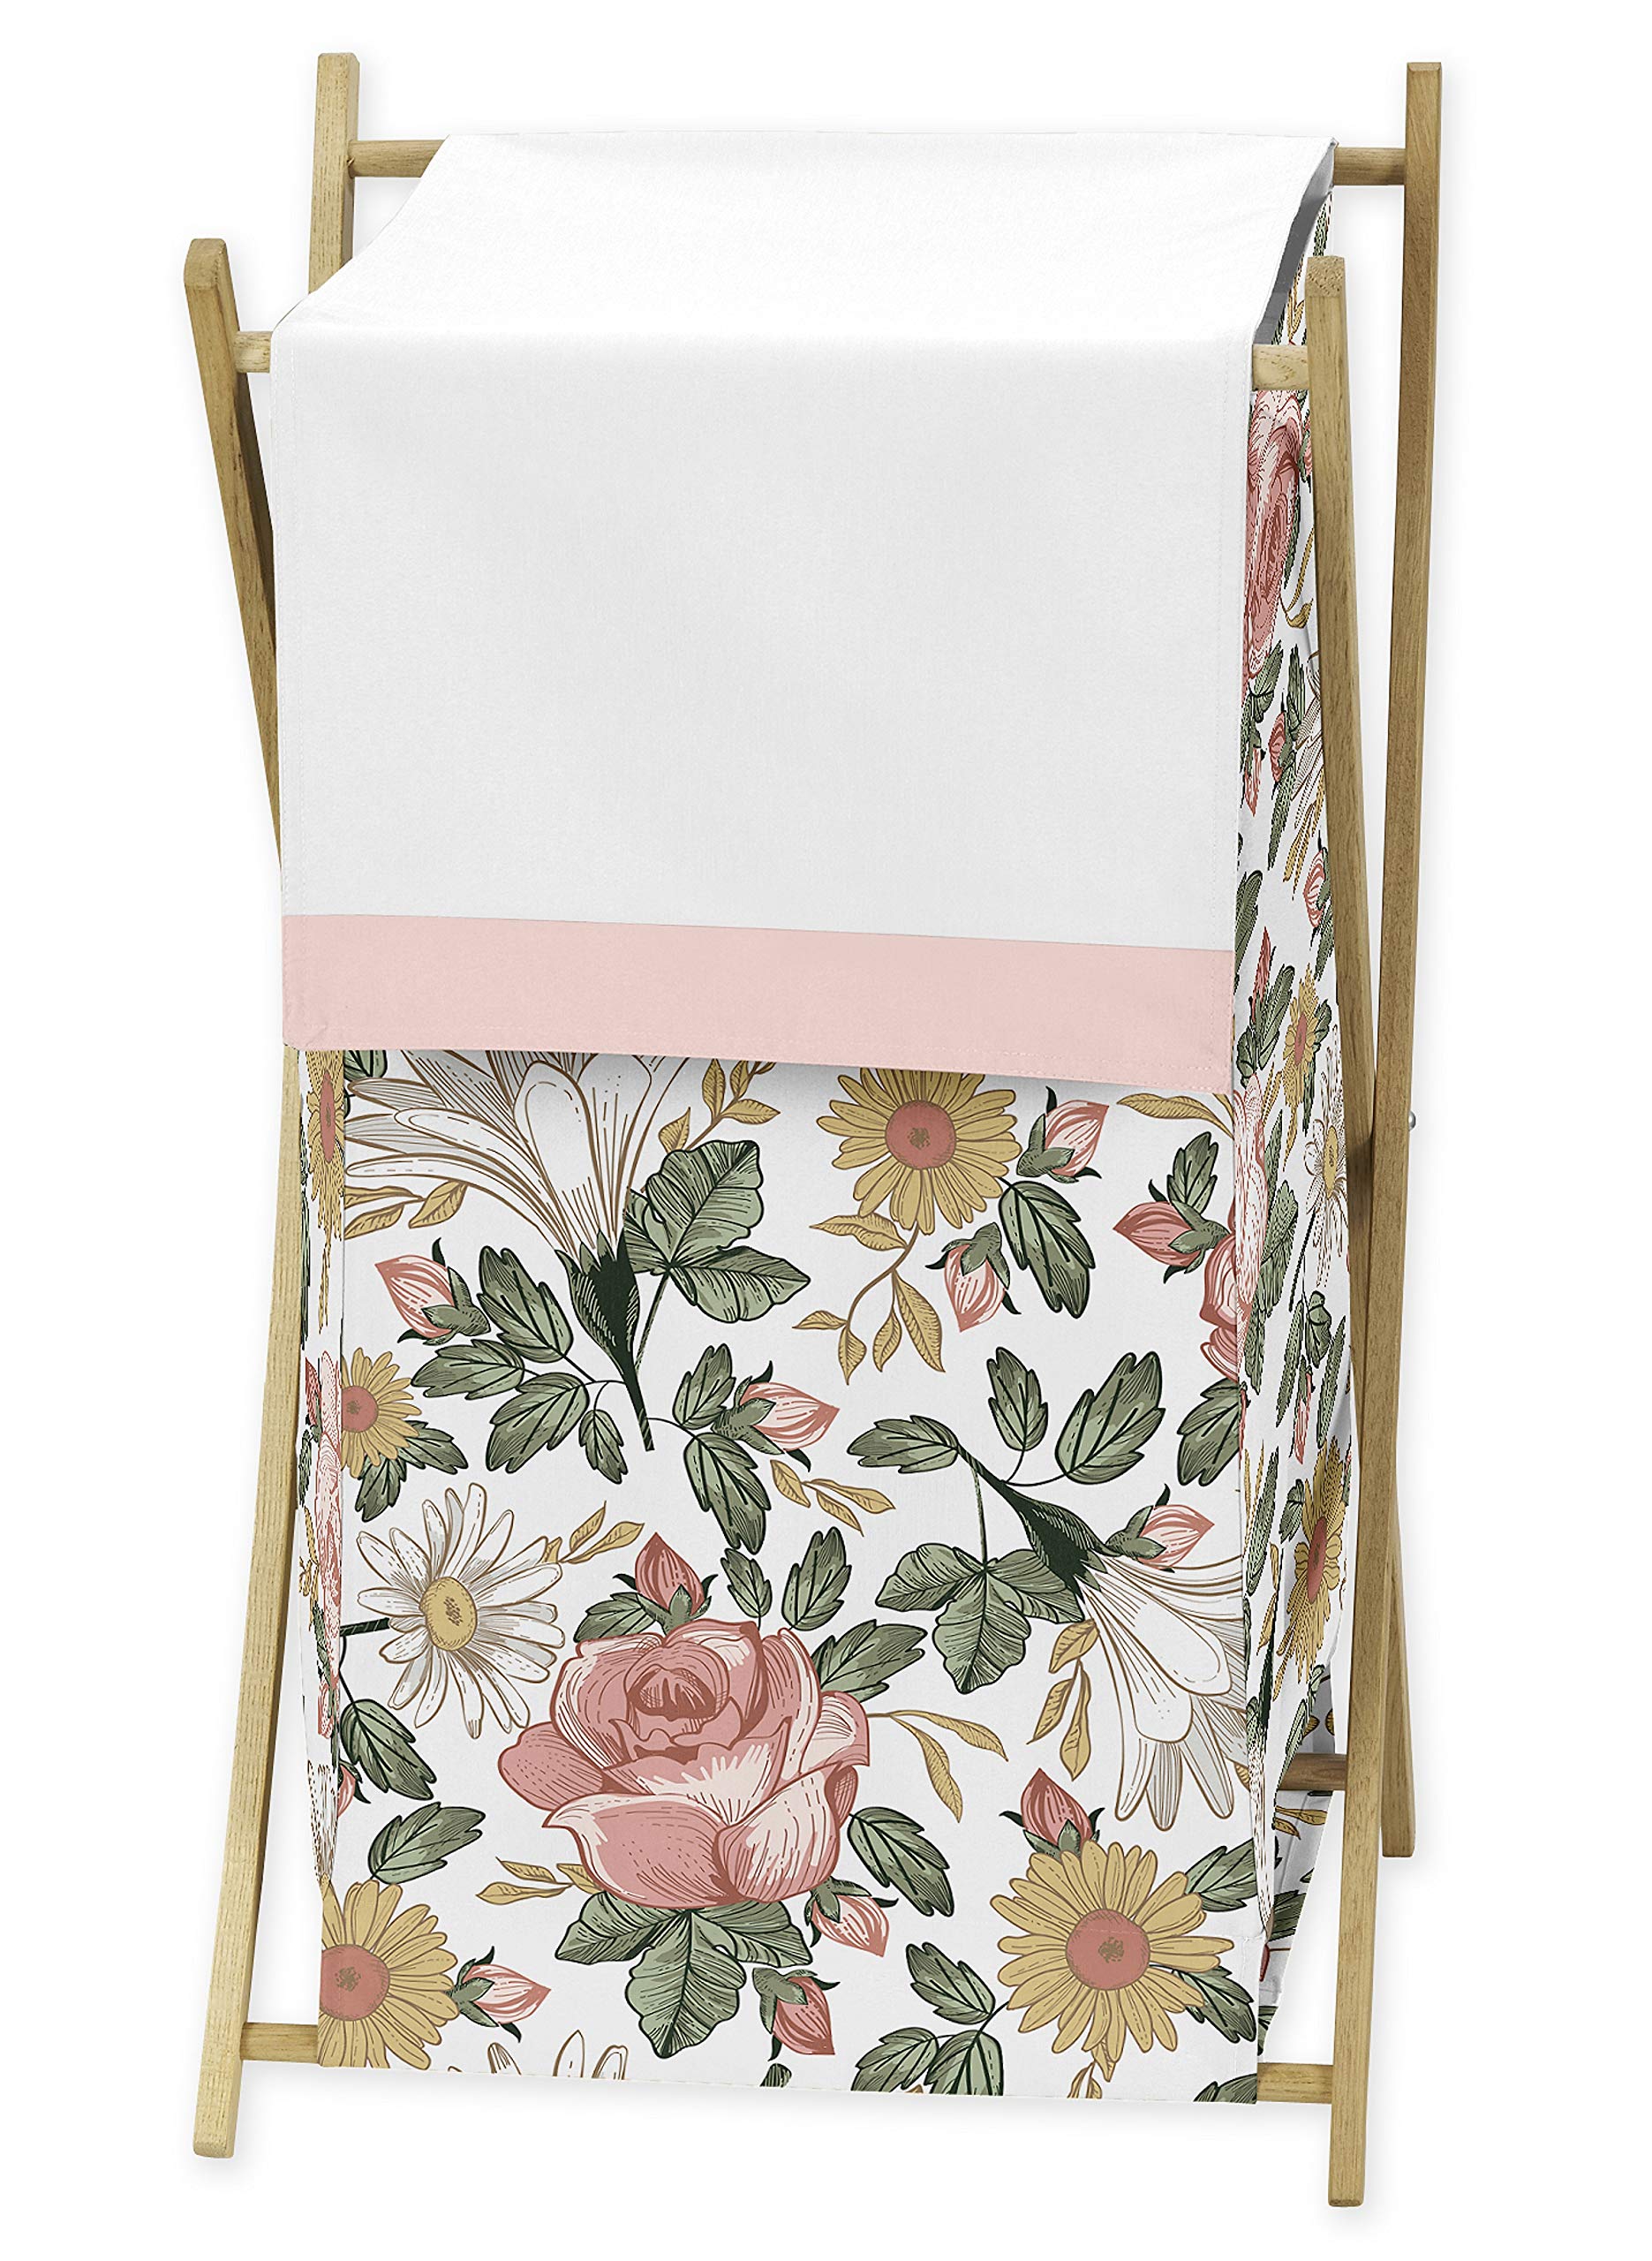 Sweet Jojo Designs Vintage Floral Boho Baby Kid clothes Laundry Hamper - Blush Pink, Yellow, green and White Shabby chic Rose Fl